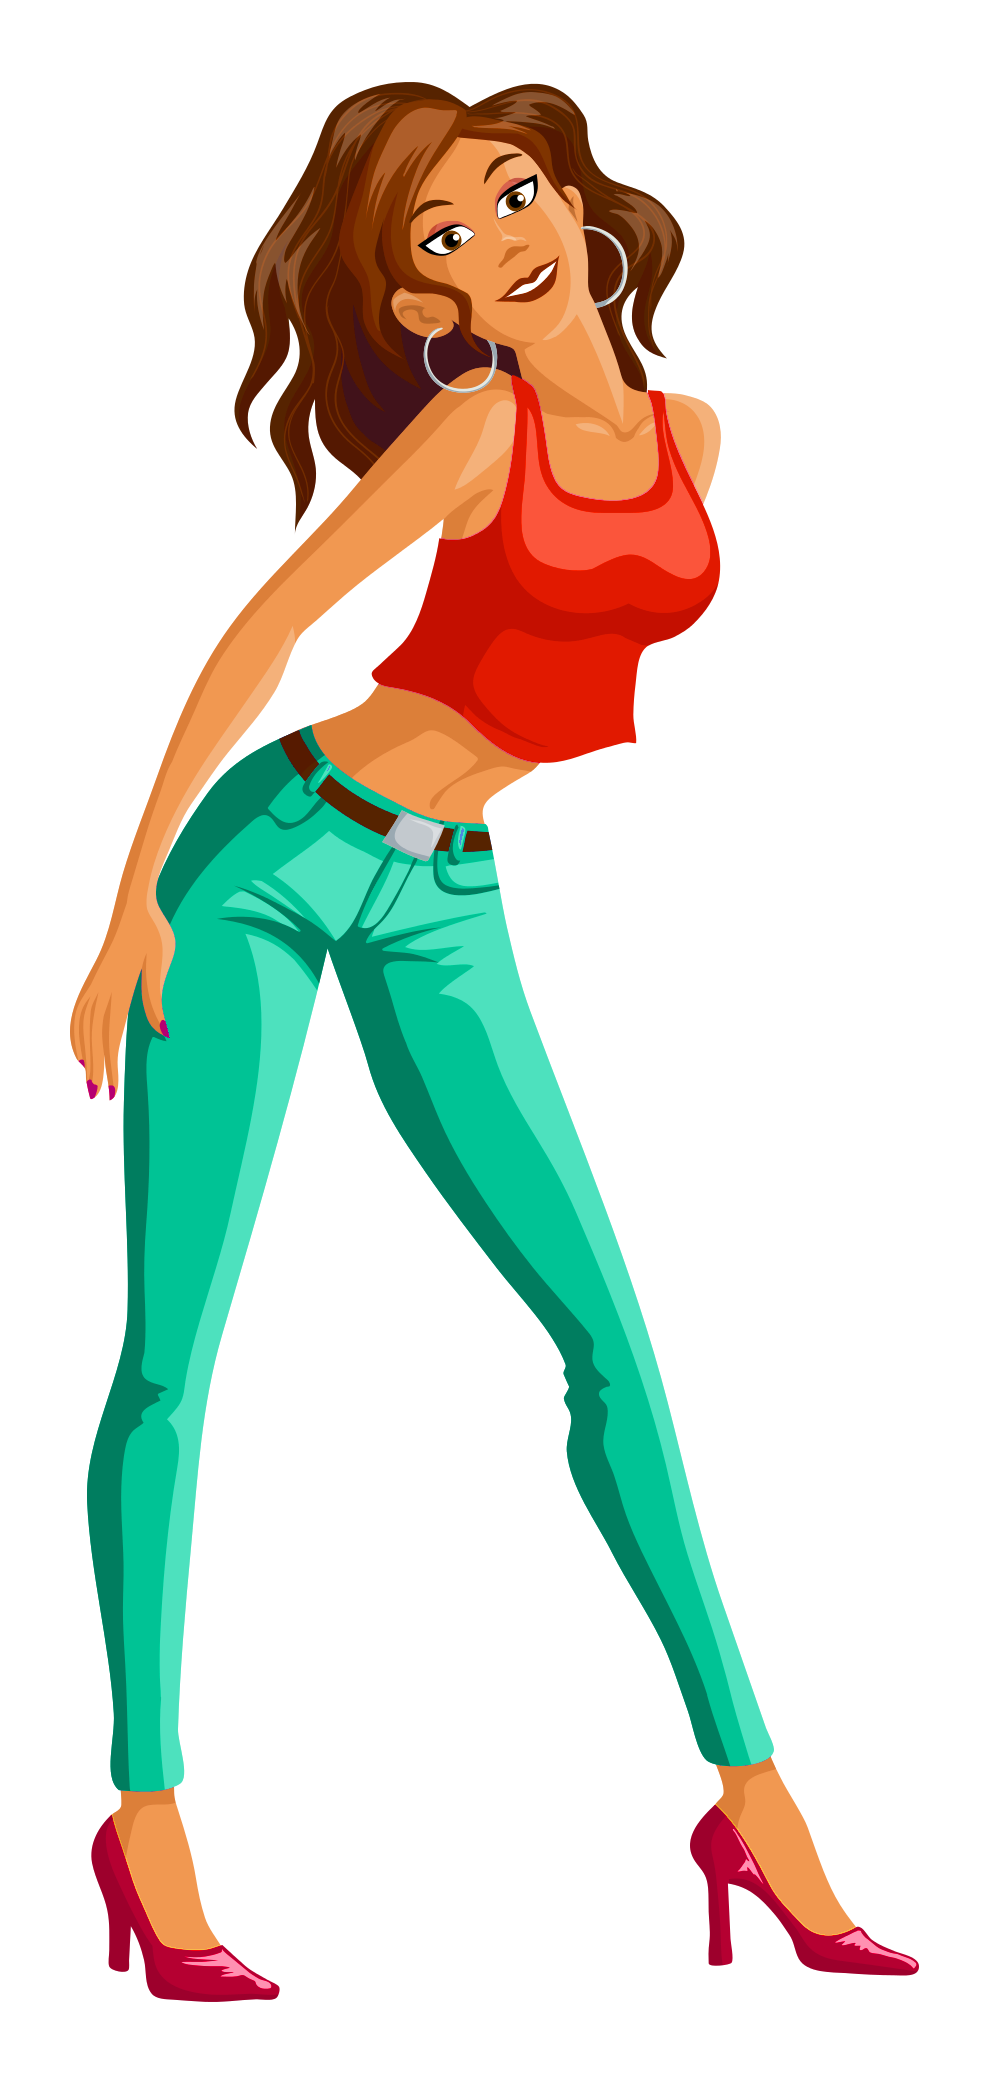 Dance Girl HQ Image Free PNG PNG Image